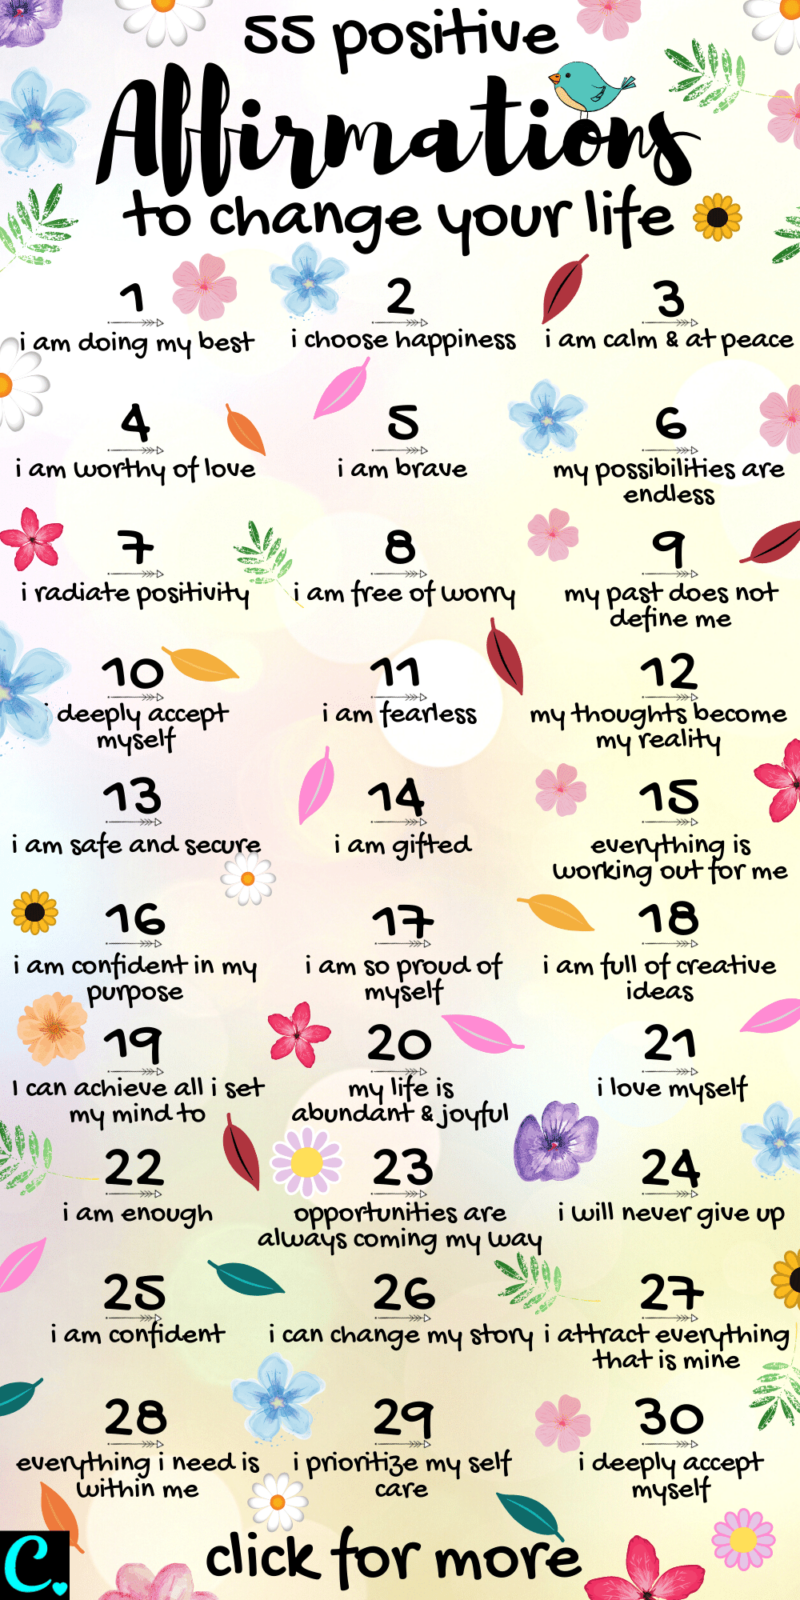 55 Positive Affirmations To Change Your Life - Captivating Crazy